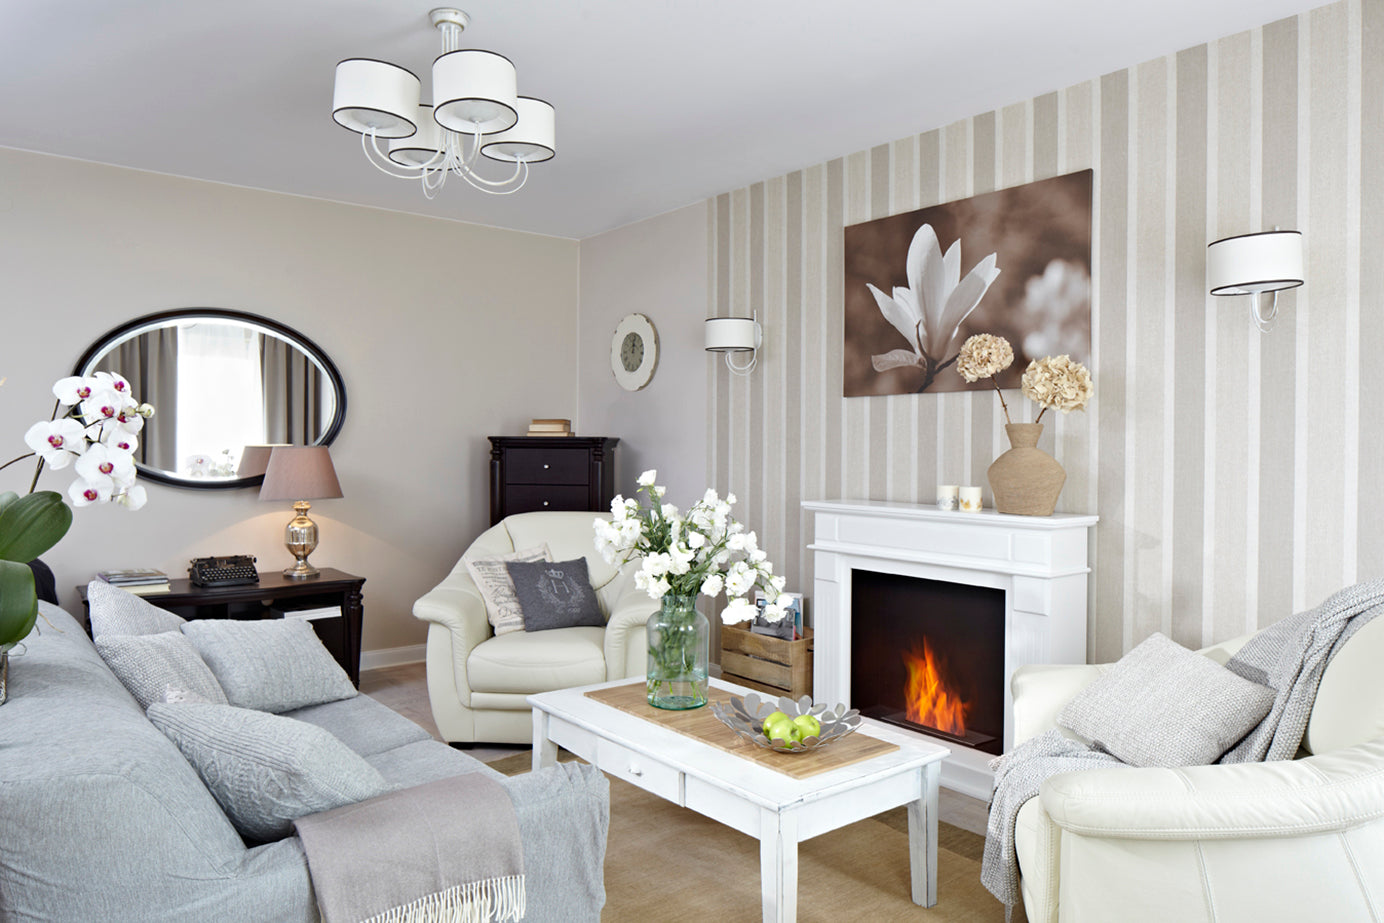 Portal Bio-fireplace ROMA colour white - Fireplace Trends Exclusive